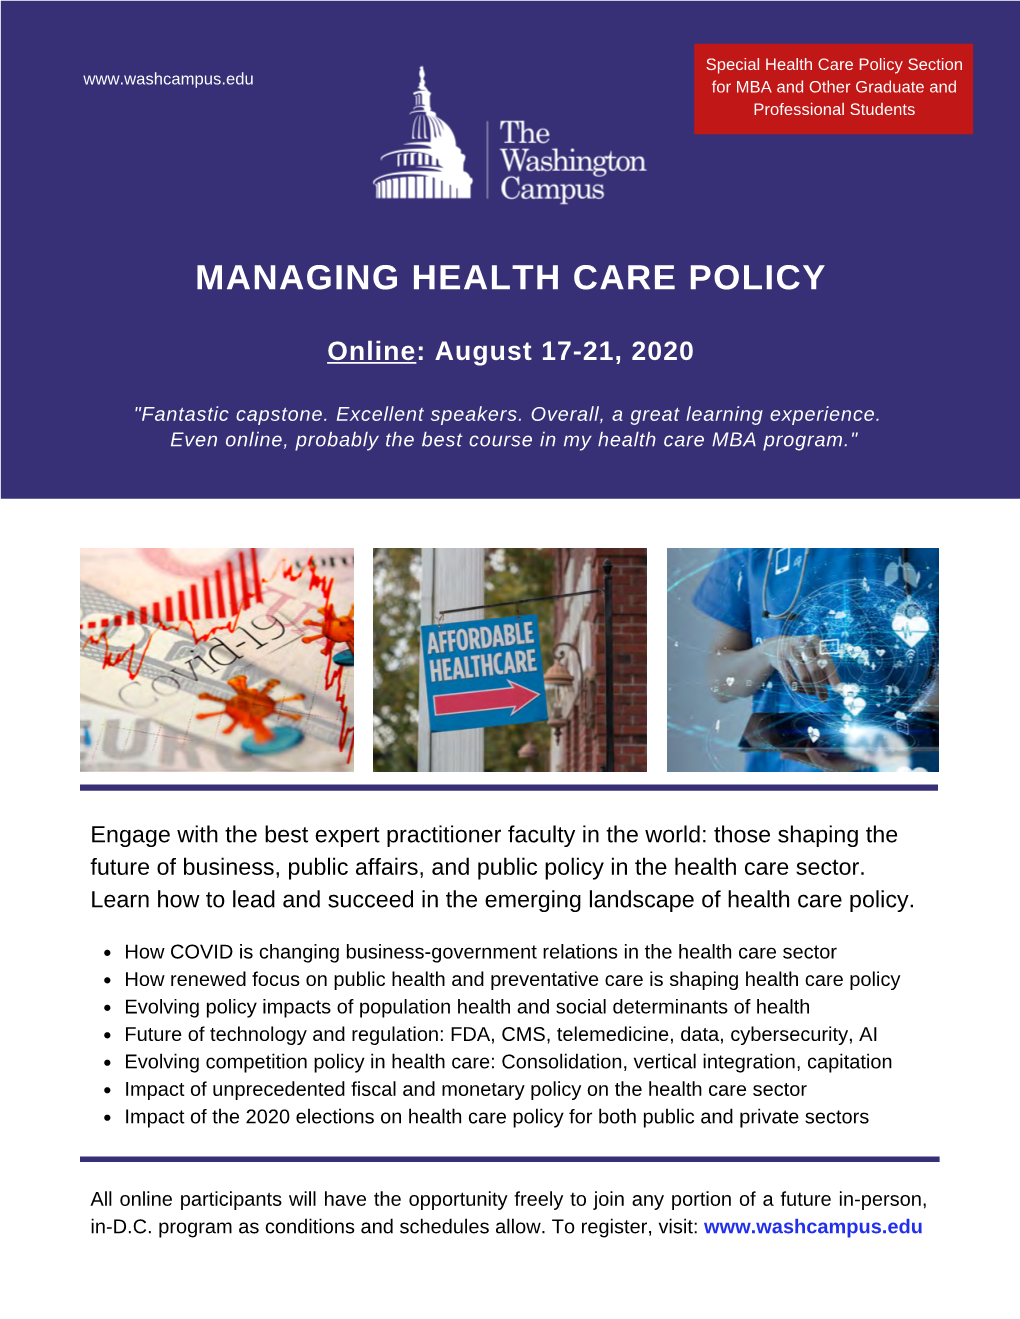 Managing Health Care Policy